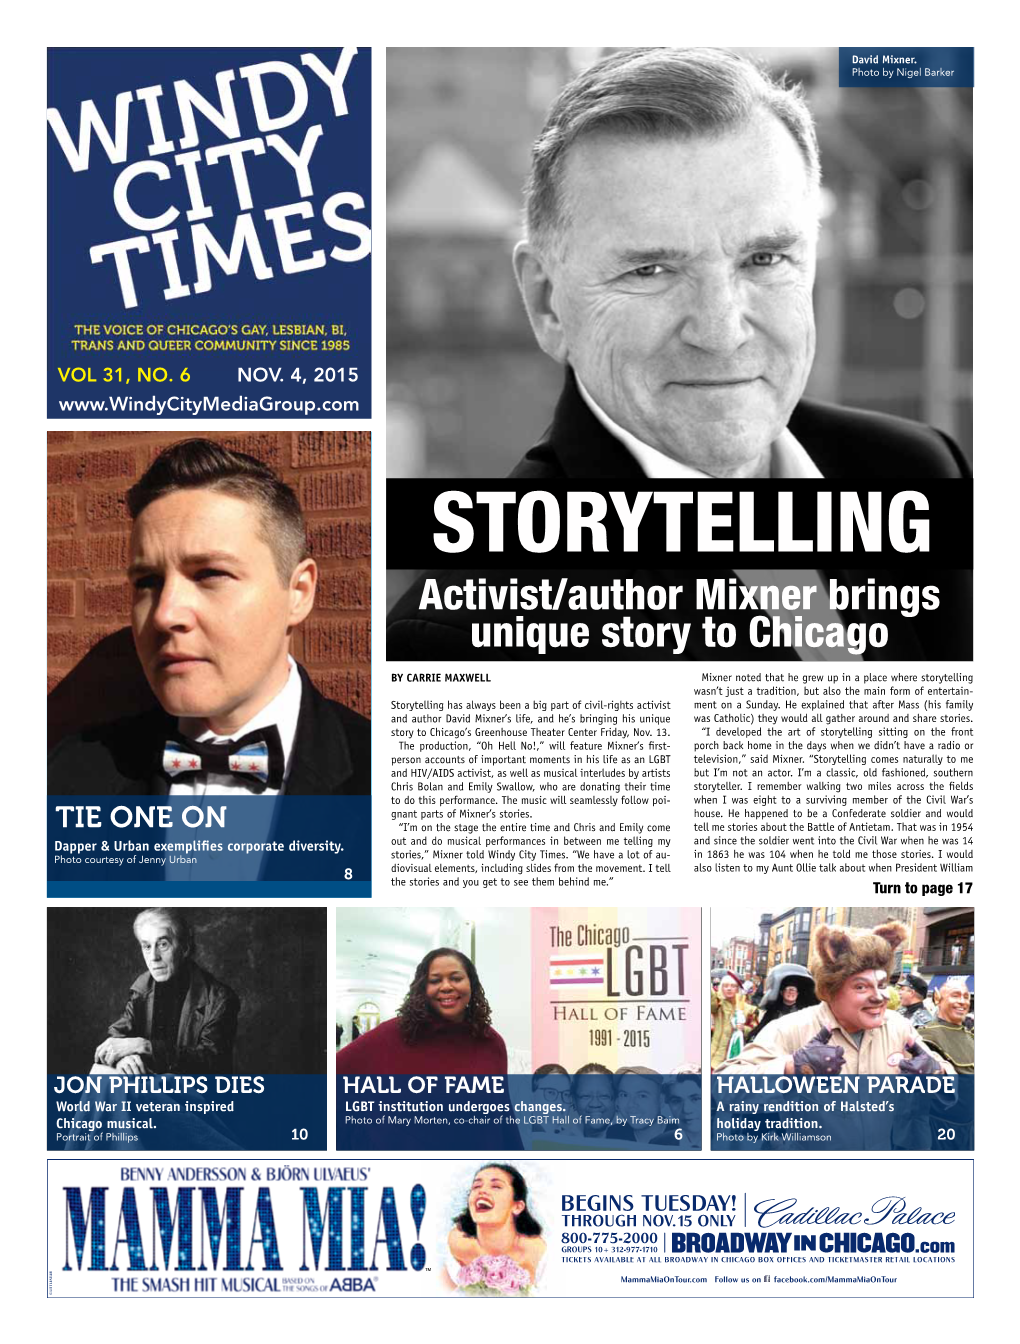 STORYTELLING Activist/Author Mixner Brings Unique Story to Chicago